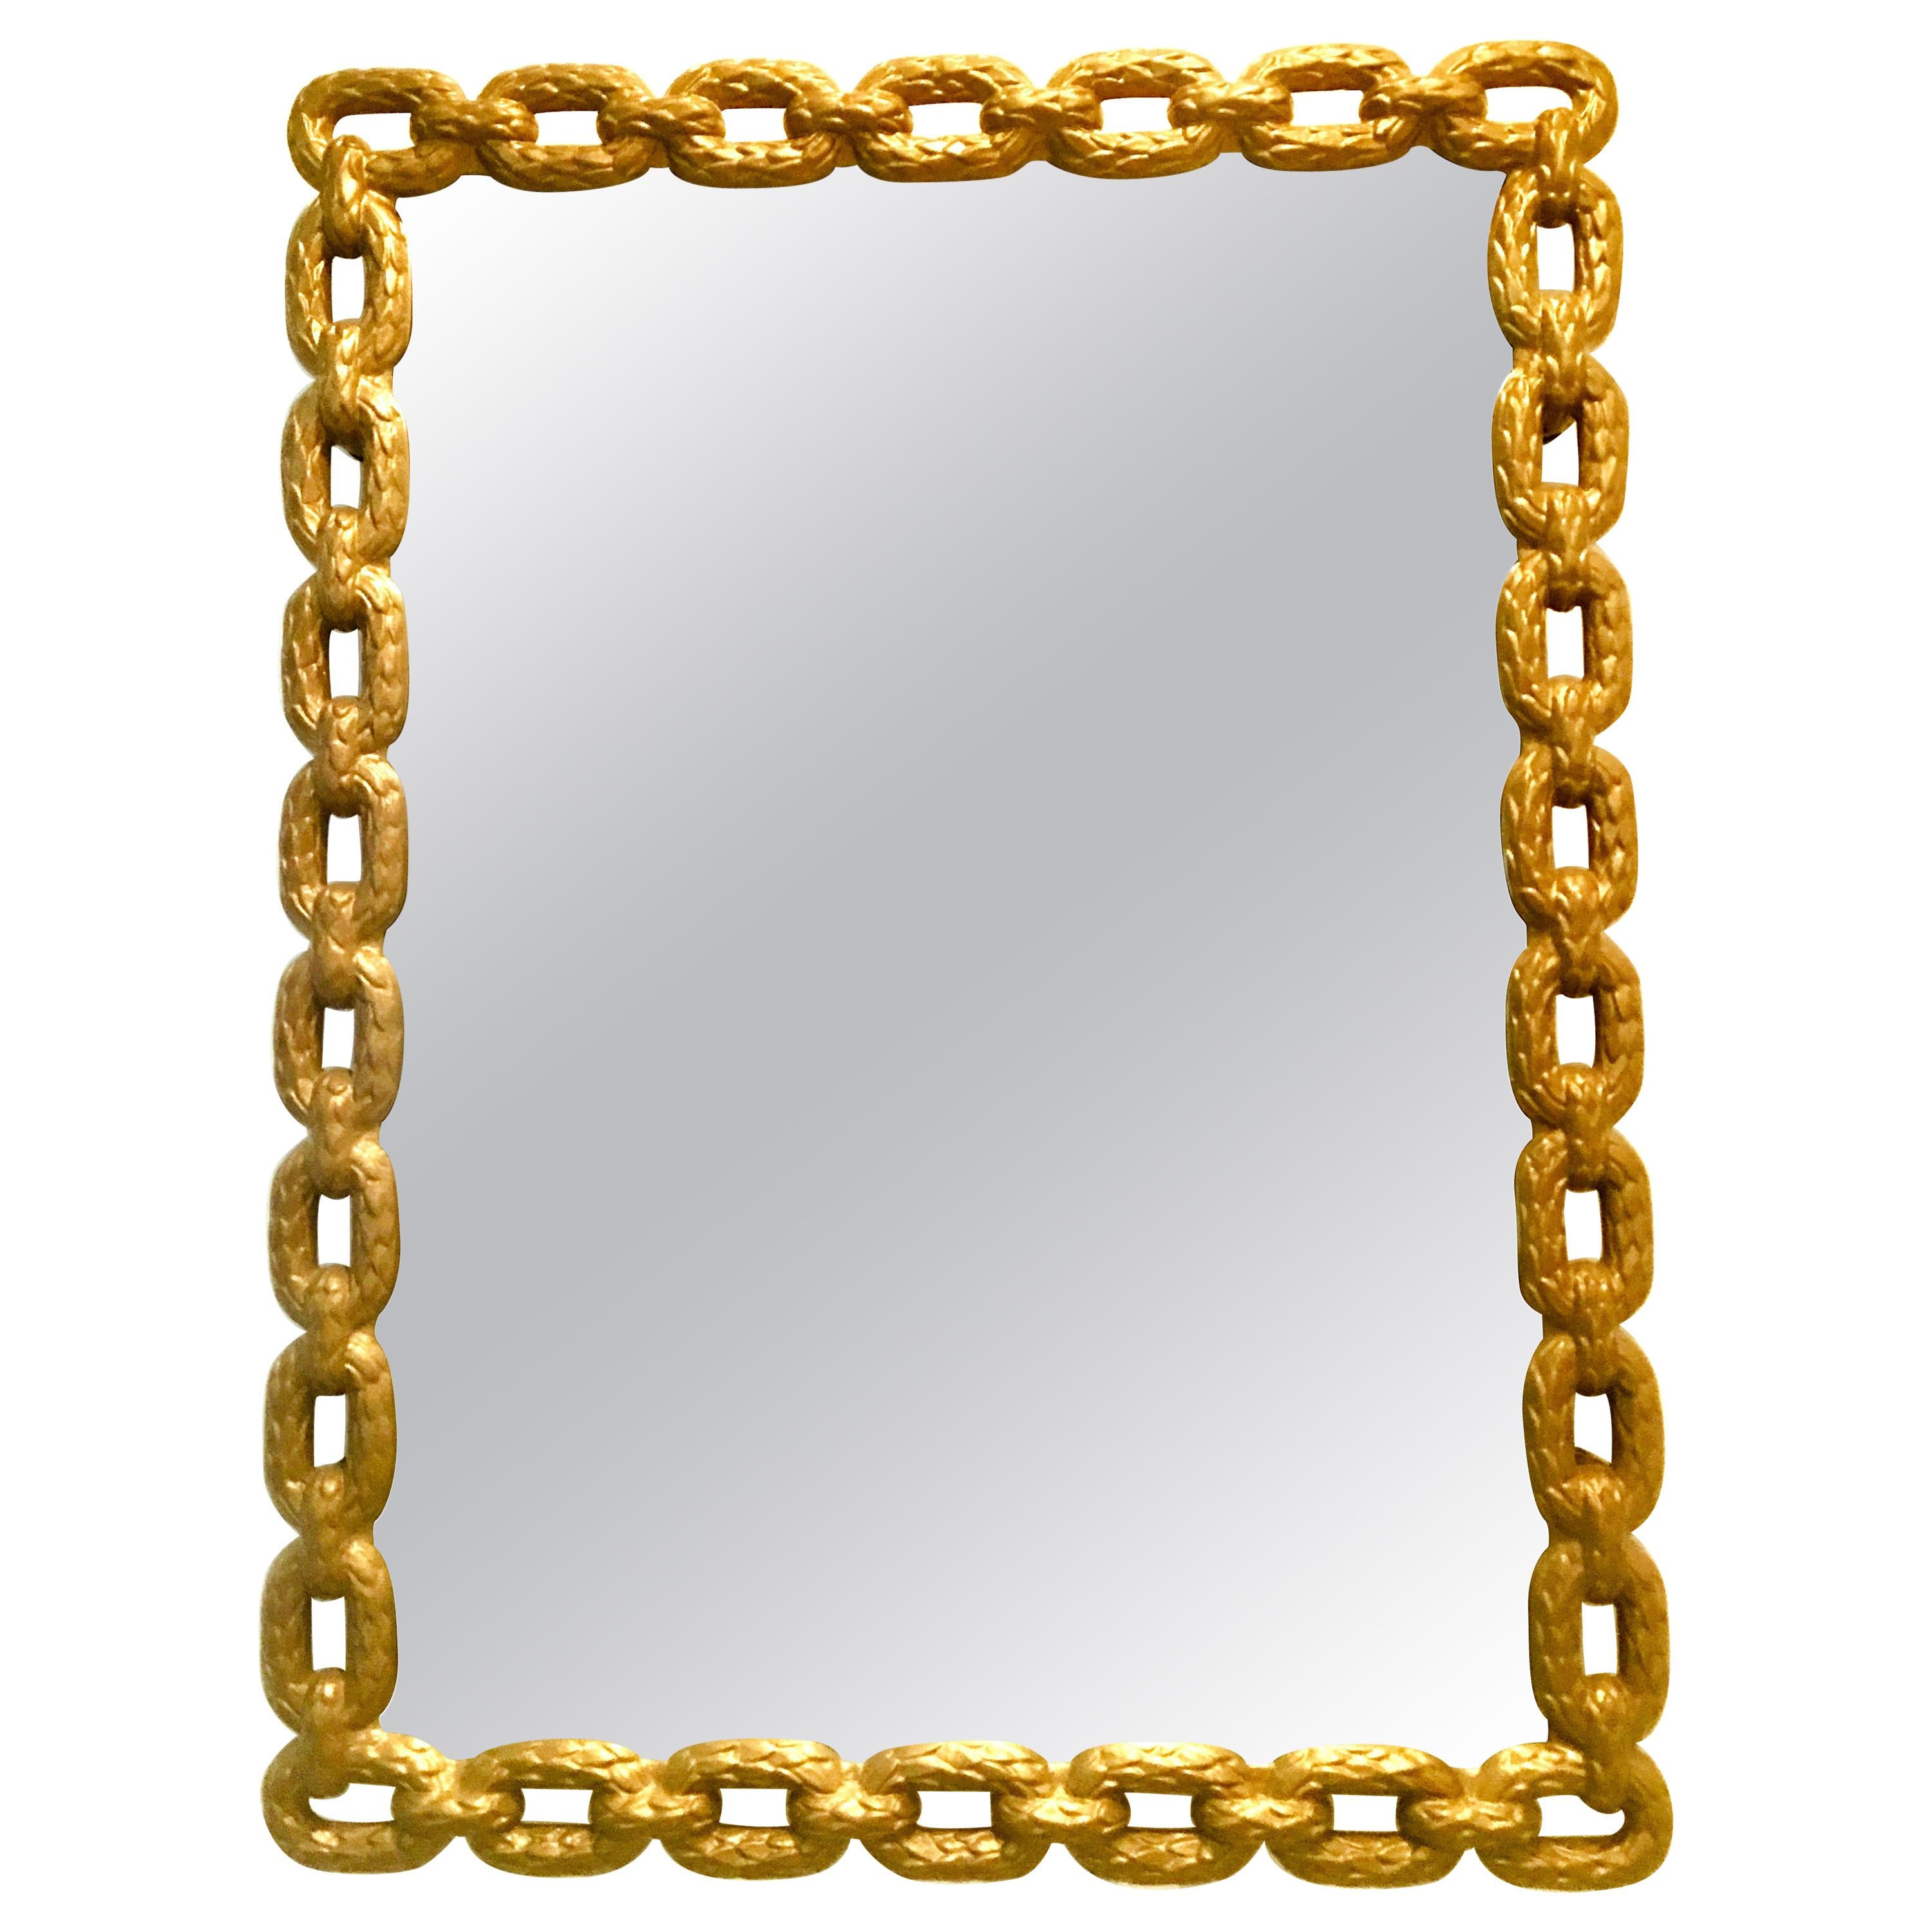 21st Century Iron Gold Rope Motif Powder-Coated Mirror's For Sale